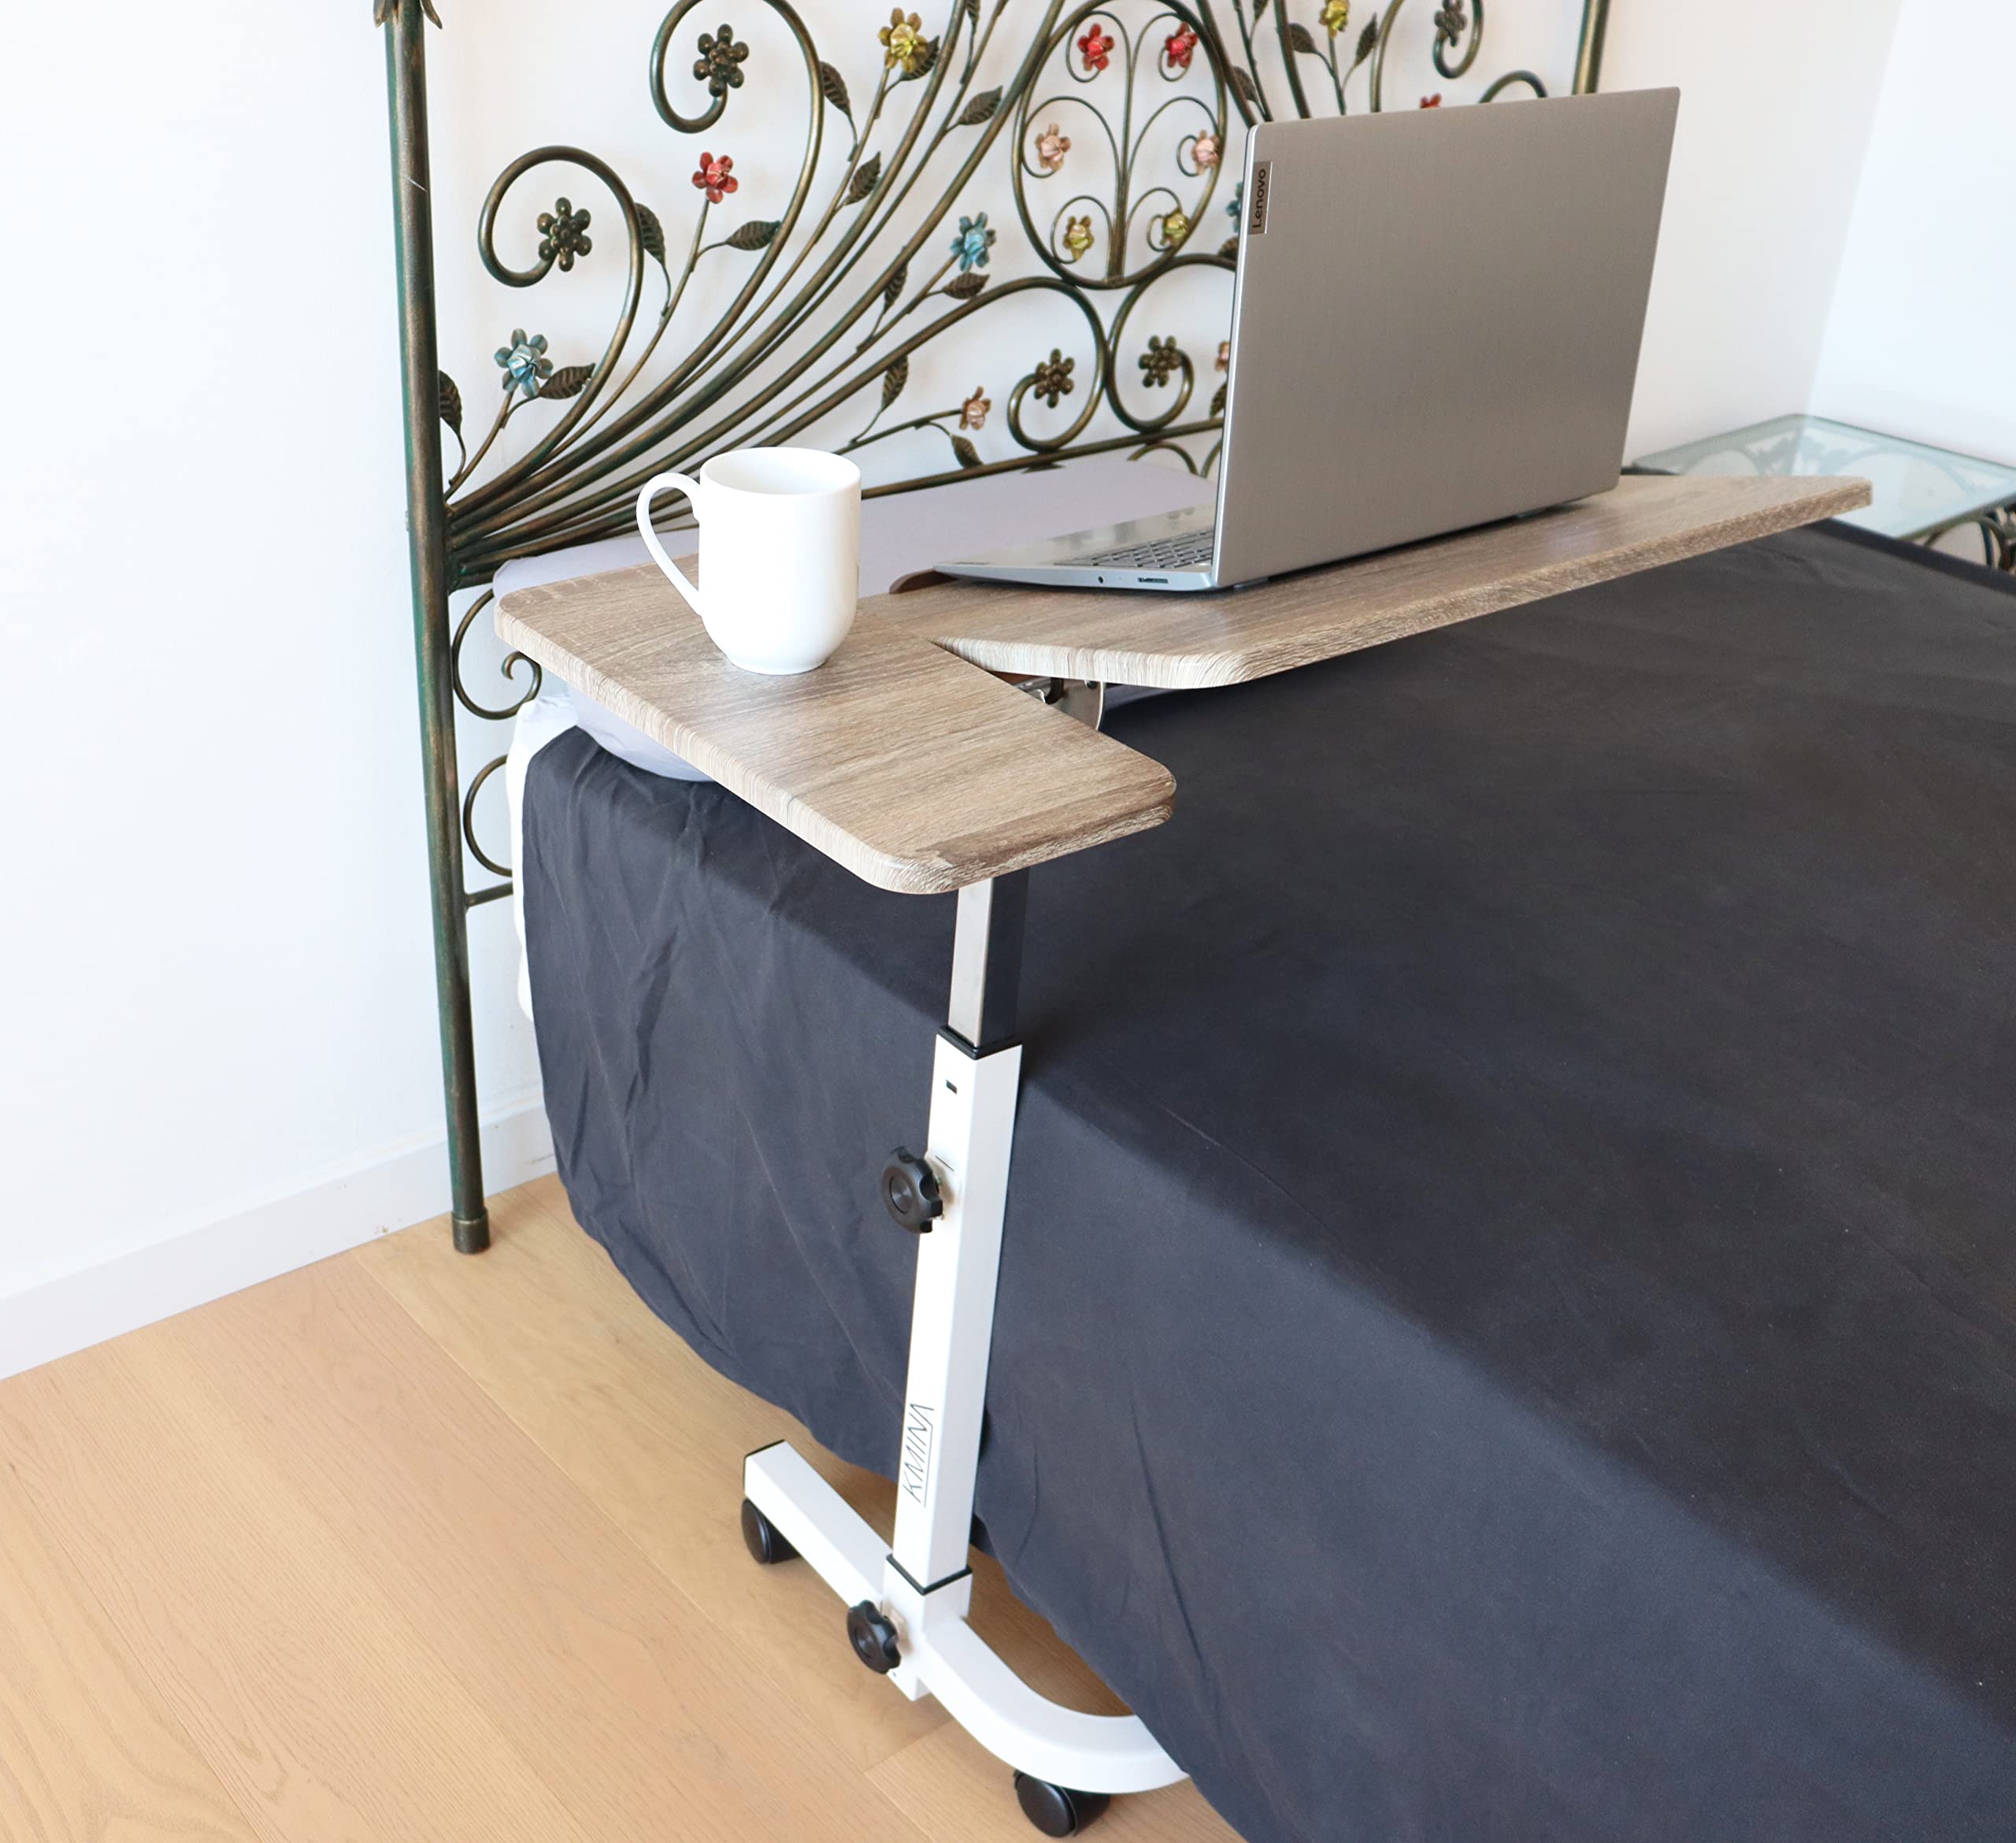 KMINA - Bedside Commode Chair and Overbed Table with Wheels Adjustable Height